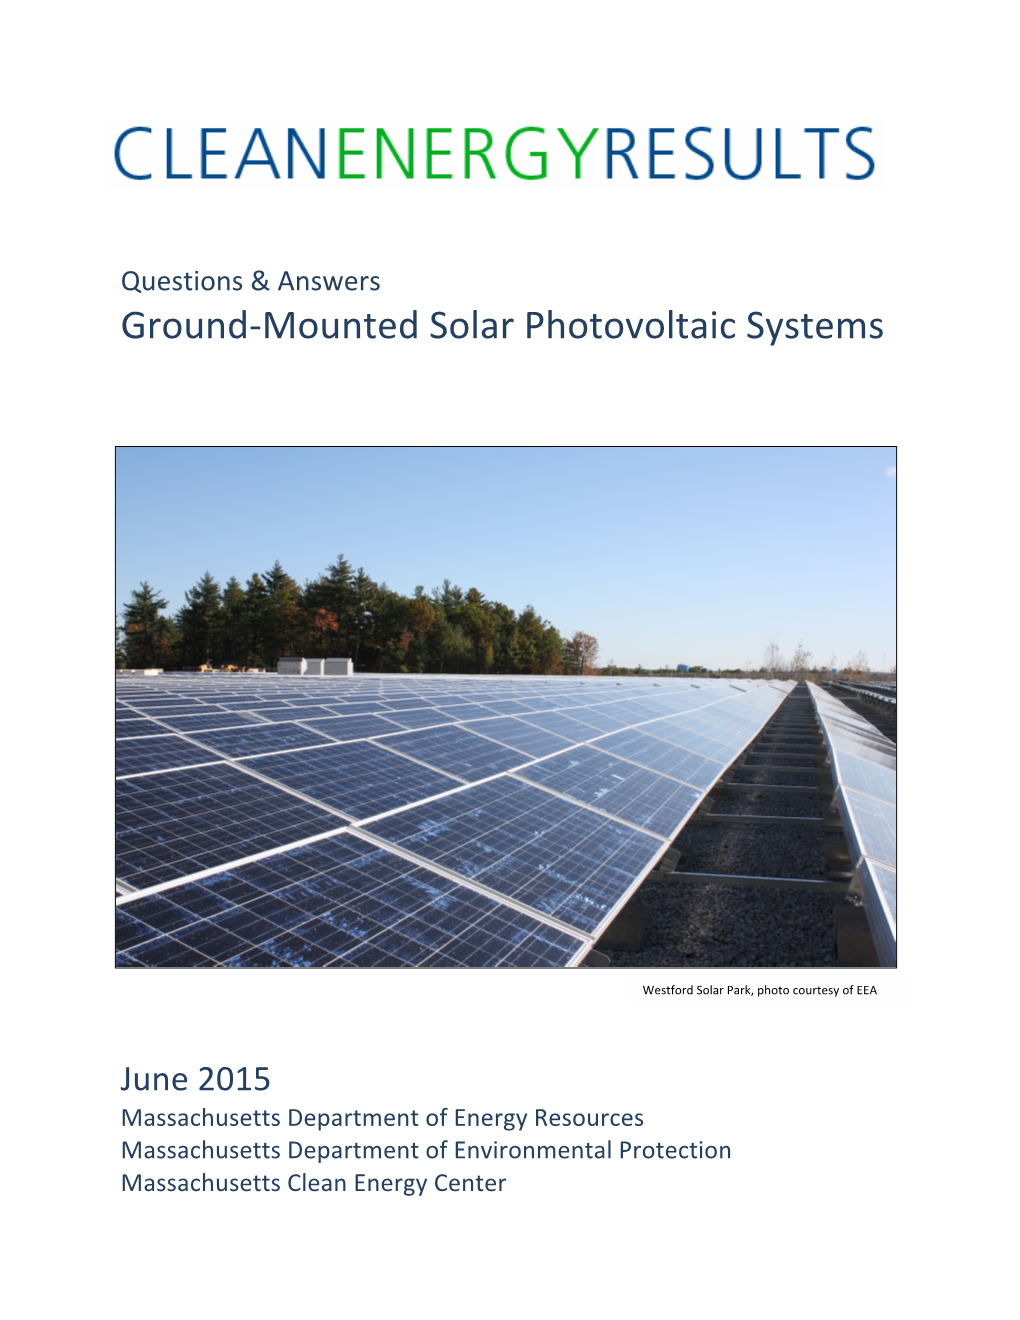 Ground-Mounted Solar Photovoltaic Systems